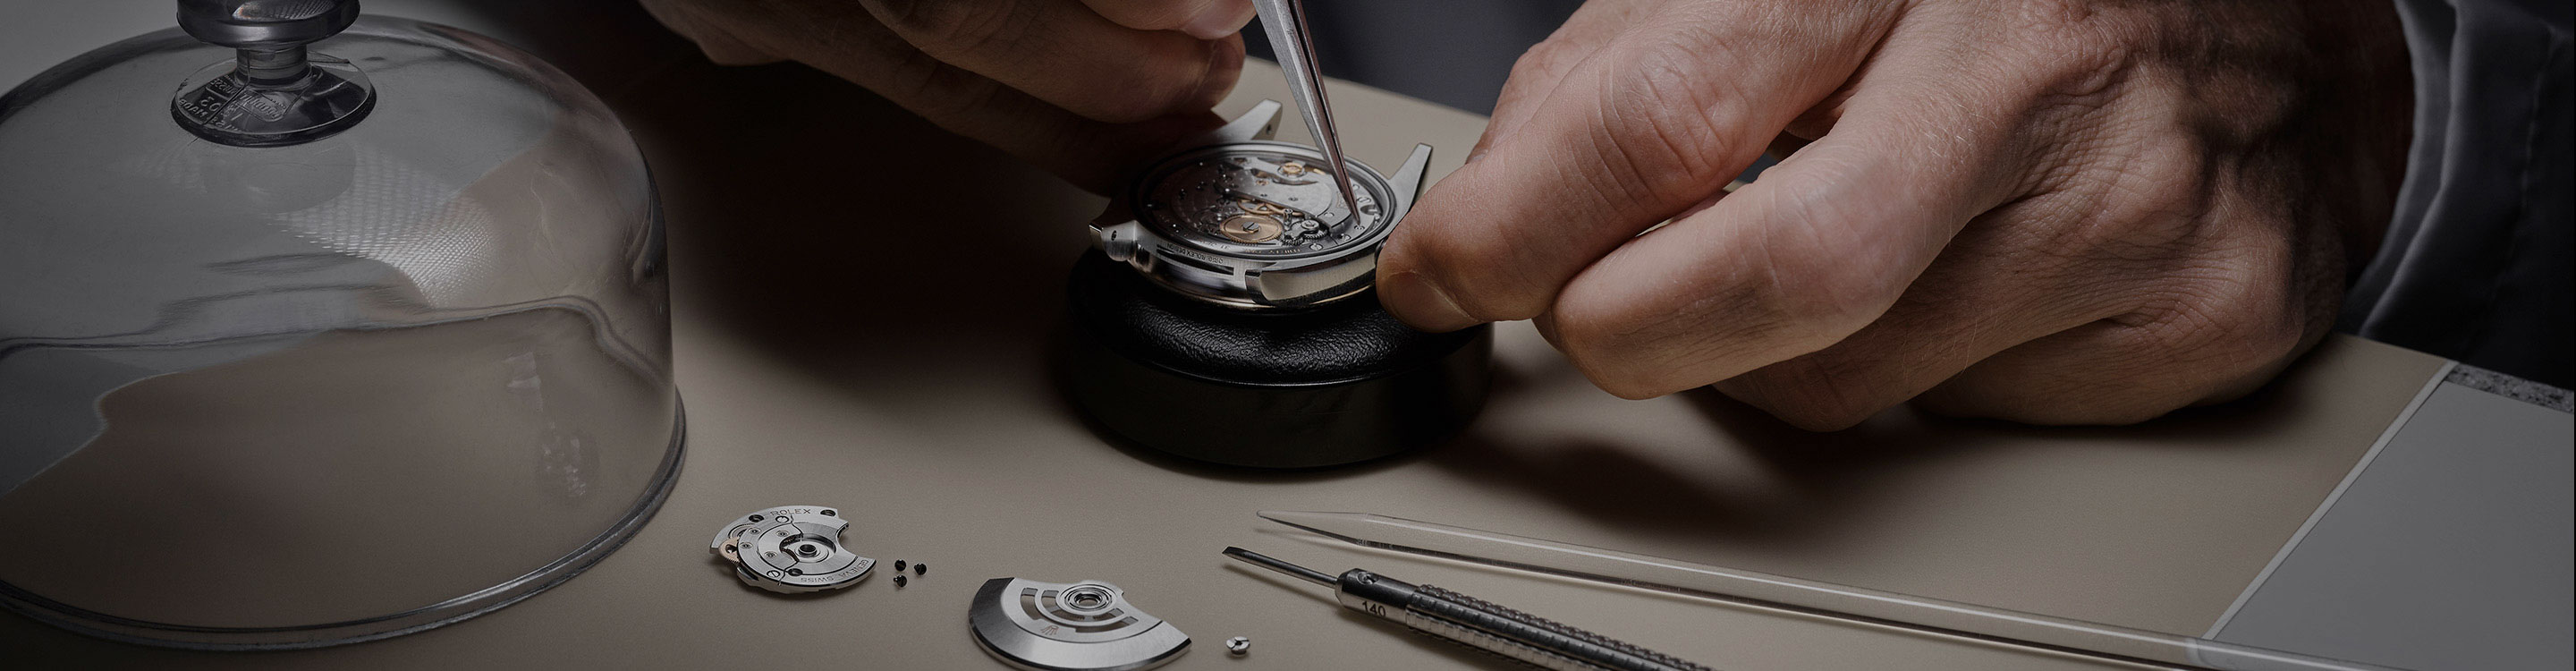 Rolex Servicing at Loupe in Milton Keynes and Croydon